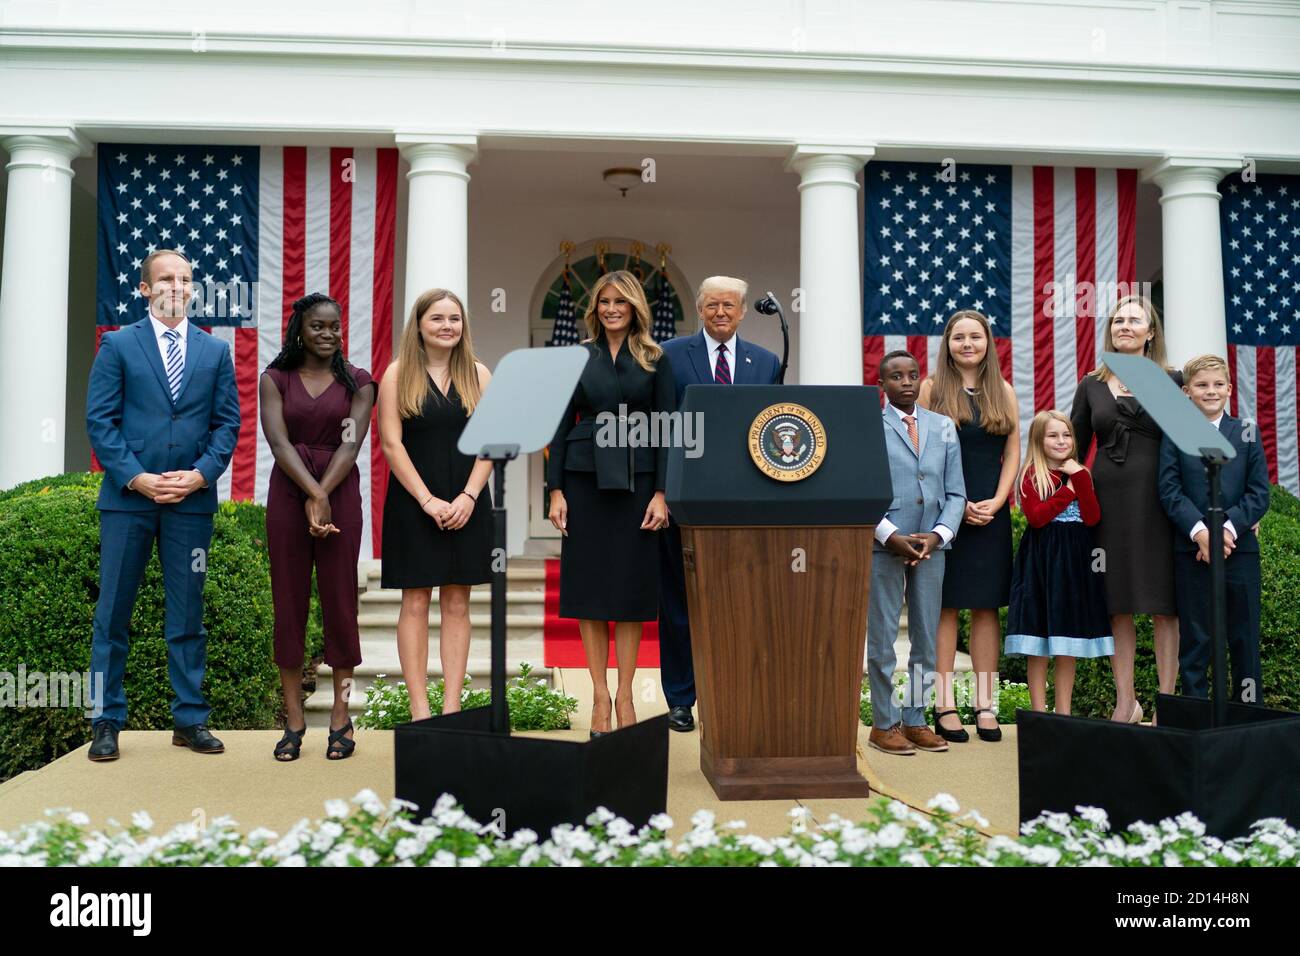 President Trump Nominates Judge Amy Coney Barrett for Associate Justice of the U.S. Supreme Court. President Donald J. Trump and First Lady Melania Trump pose for a photo with Judge Amy Coney Barrett and her family members after being announced as the President’s nominee for Associate Justice of the Supreme Court of the United States Saturday, Sept. 26, 2020, in the Rose Garden of the White House. Stock Photo